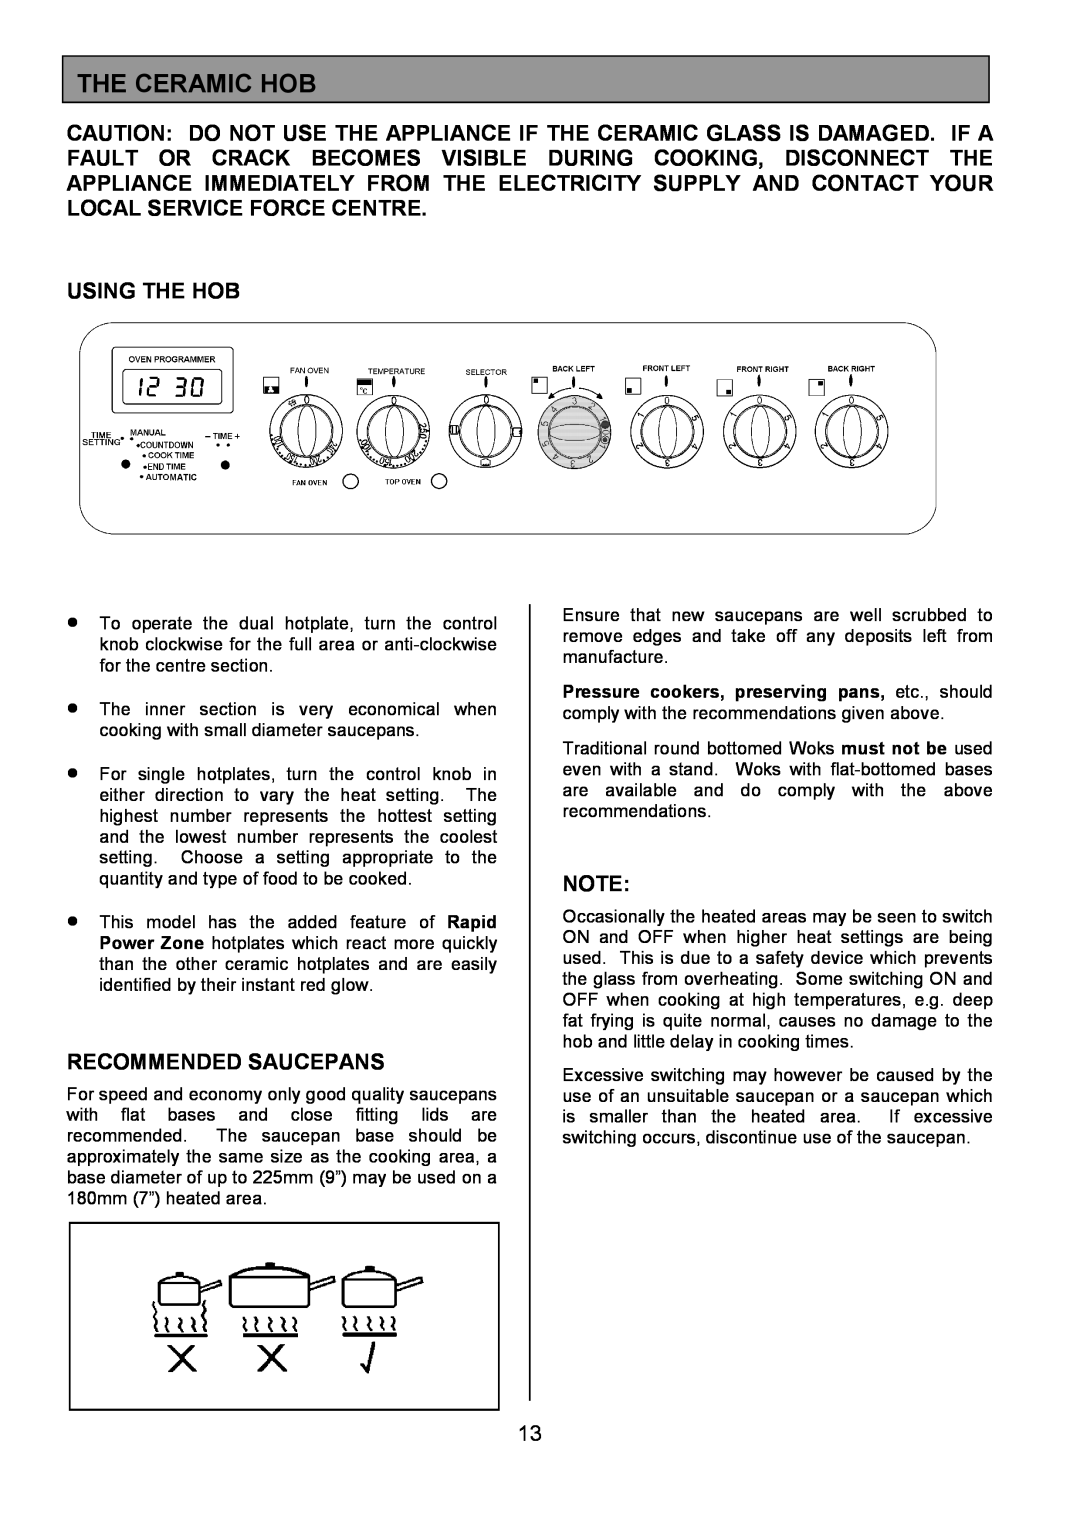 Tricity Bendix DSIE456 installation instructions The Ceramic Hob, Using The Hob, Recommended Saucepans 